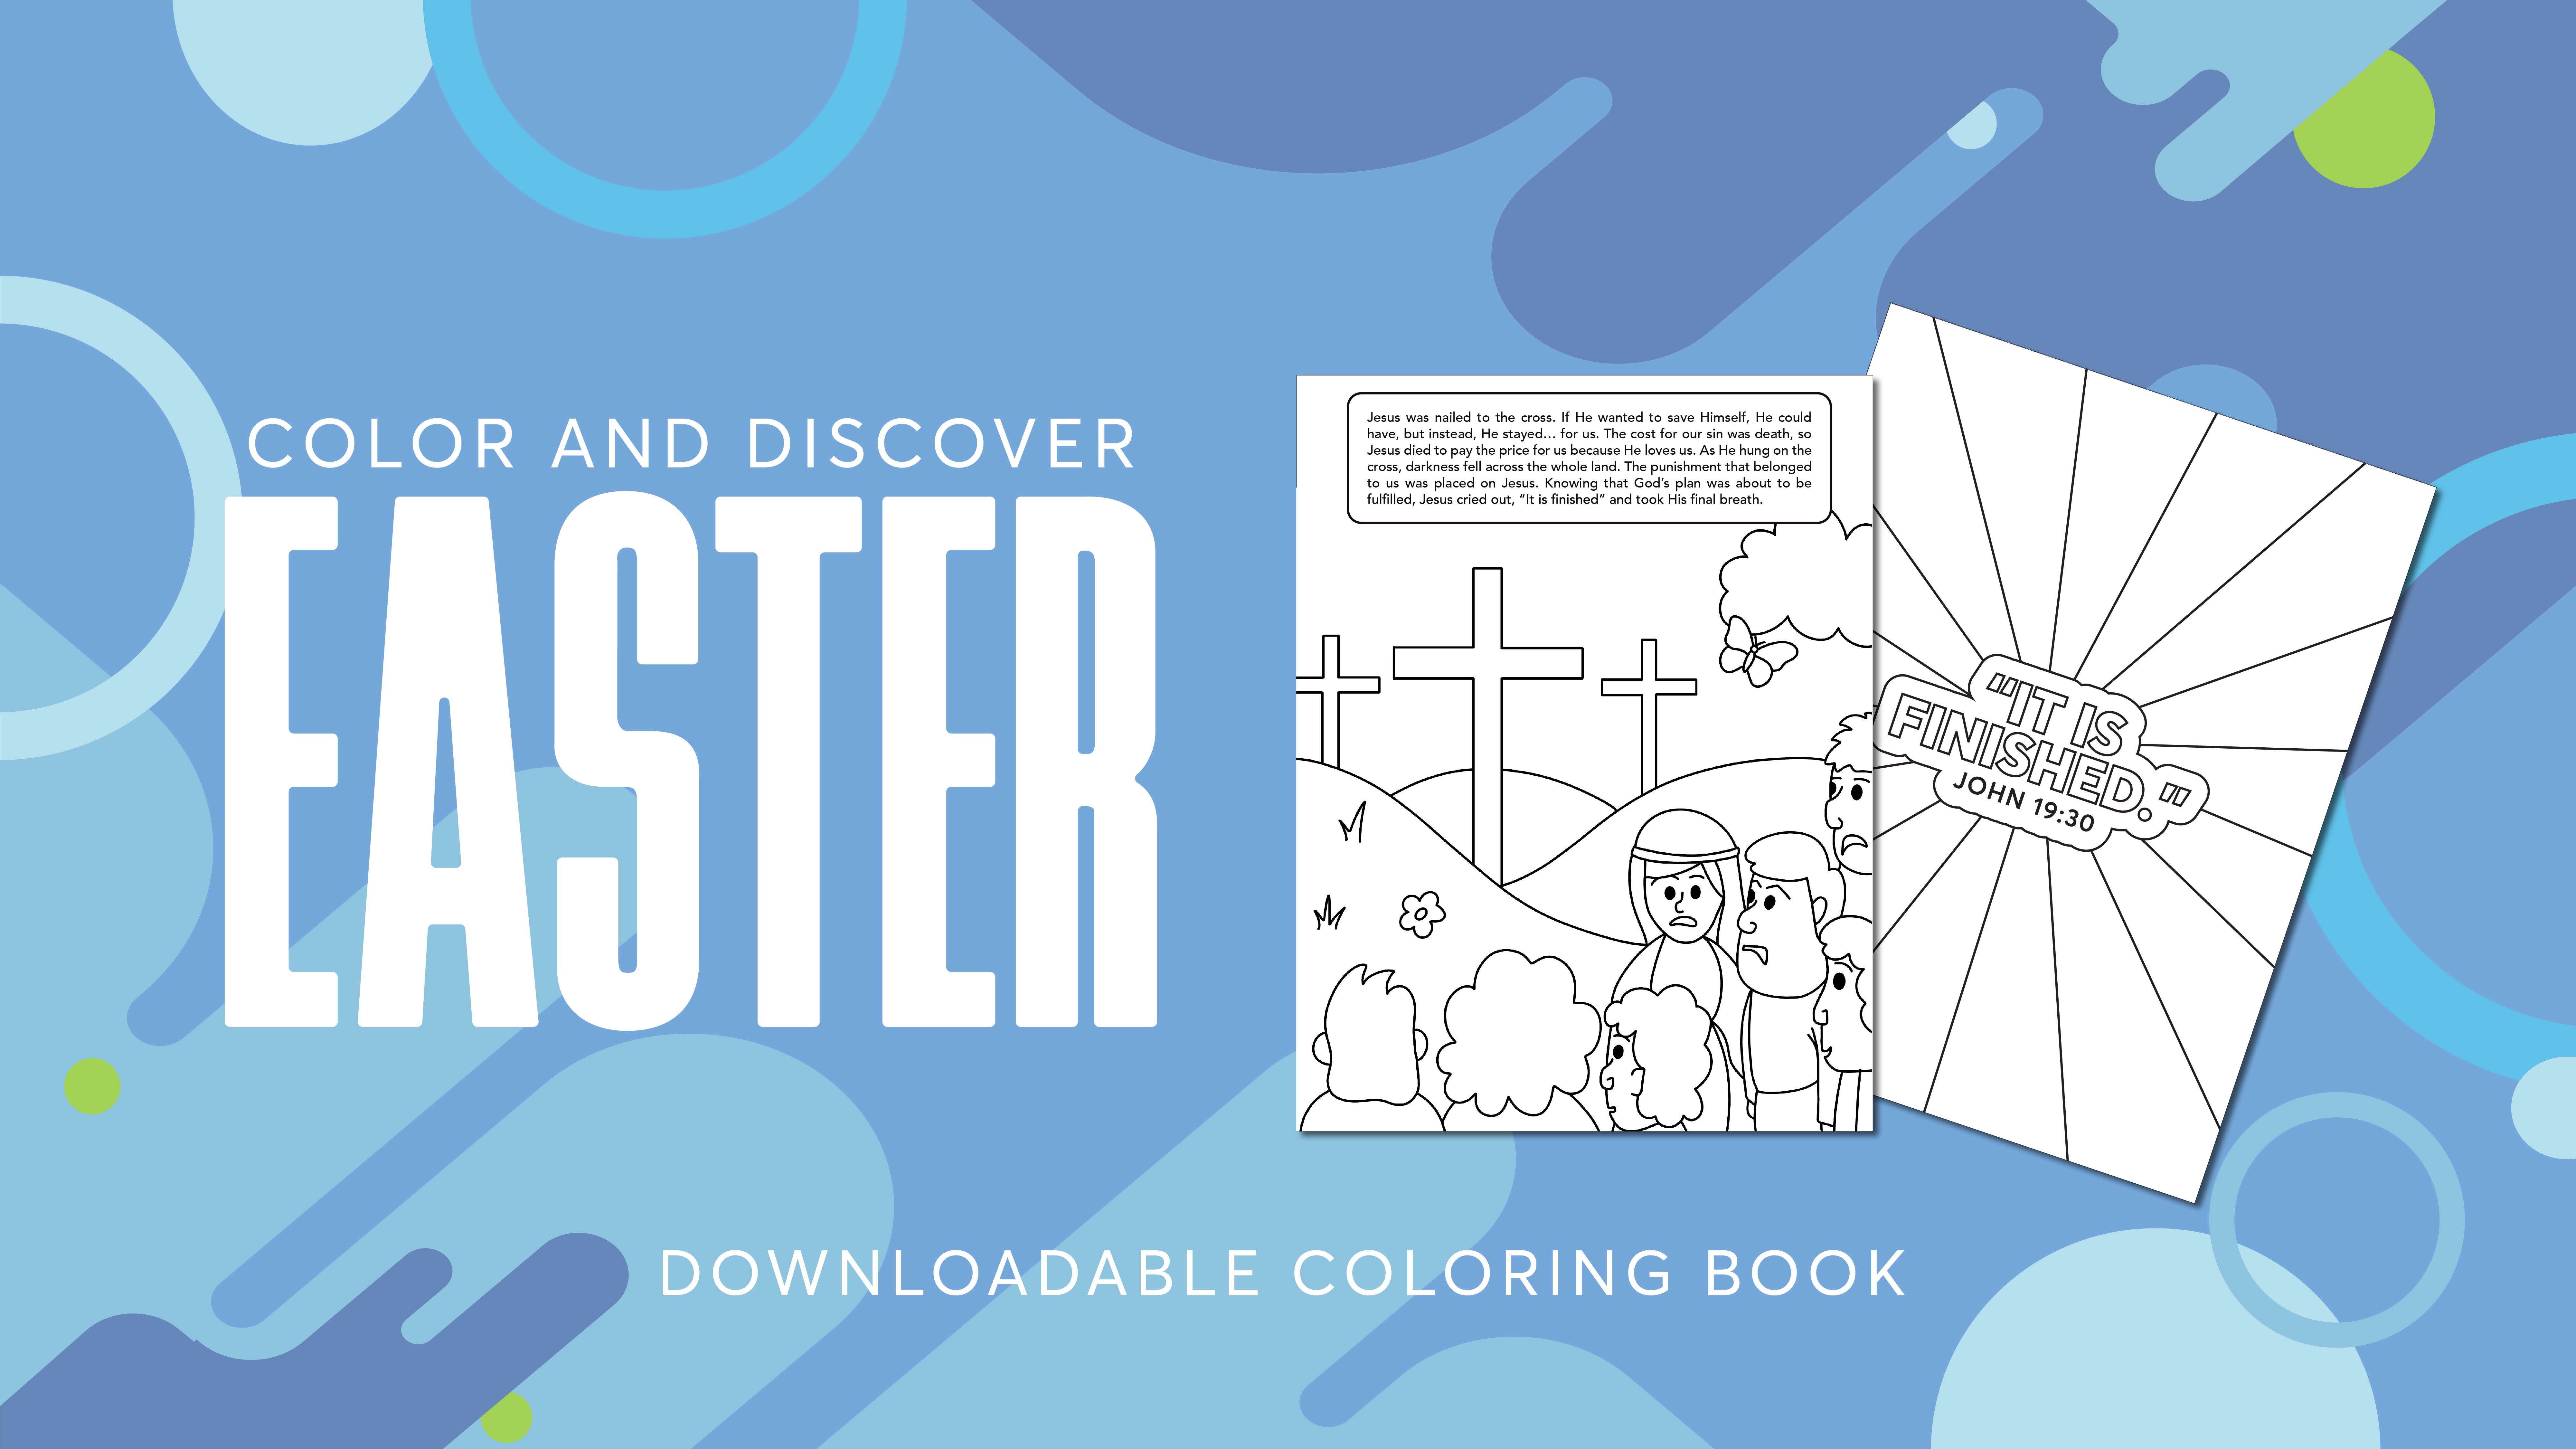 Color and Discover Easter